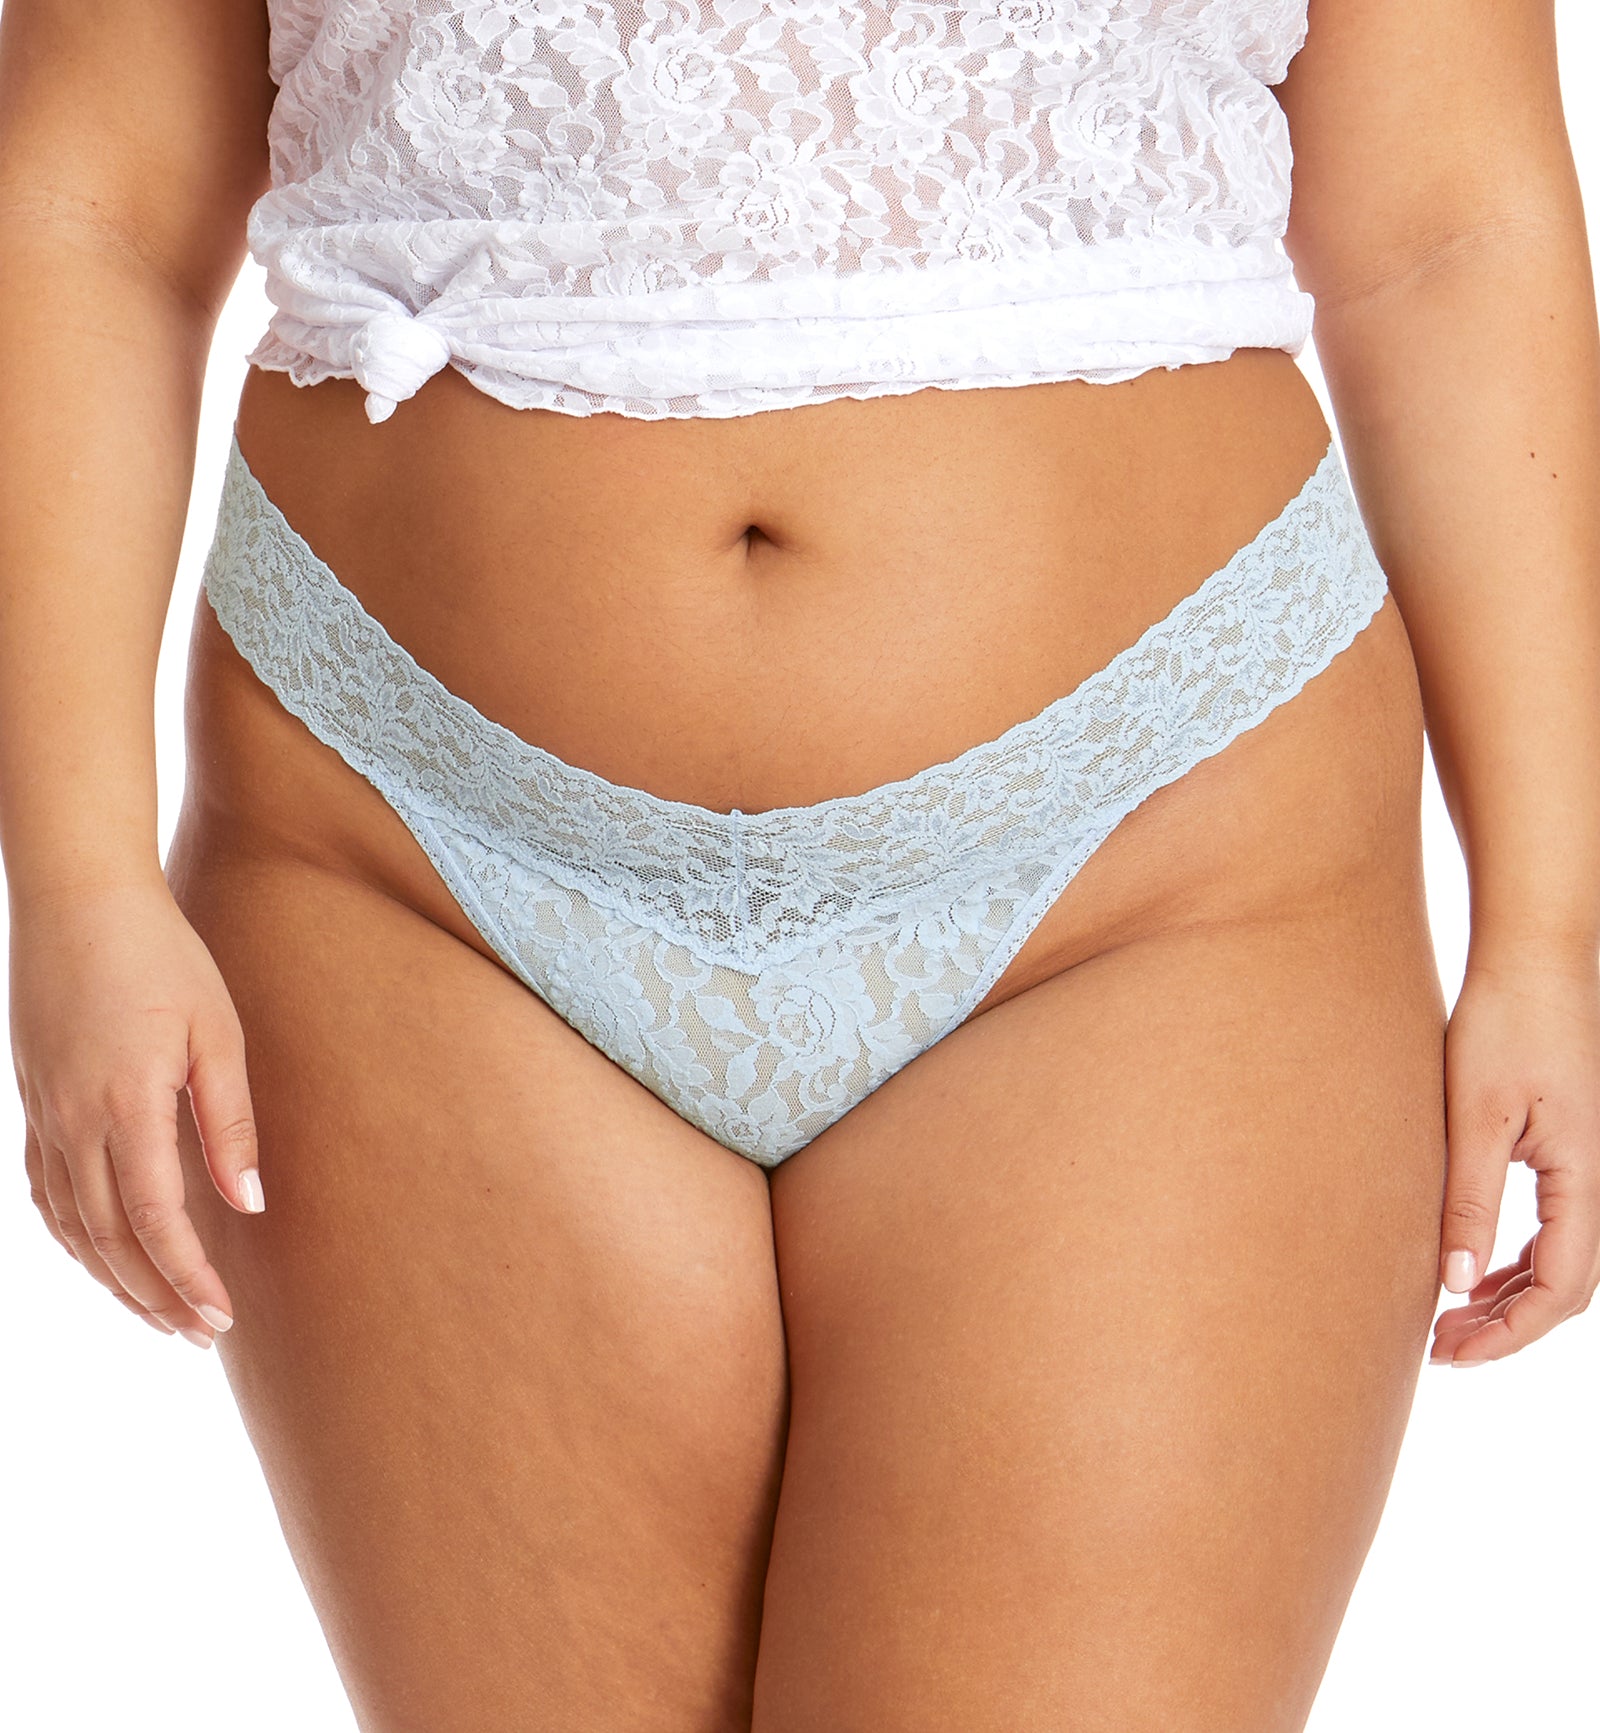 Hanky Panky Signature Lace Original Rise Thong PLUS (4811X),Partly Cloudy - Partly Cloudy,Plus Size